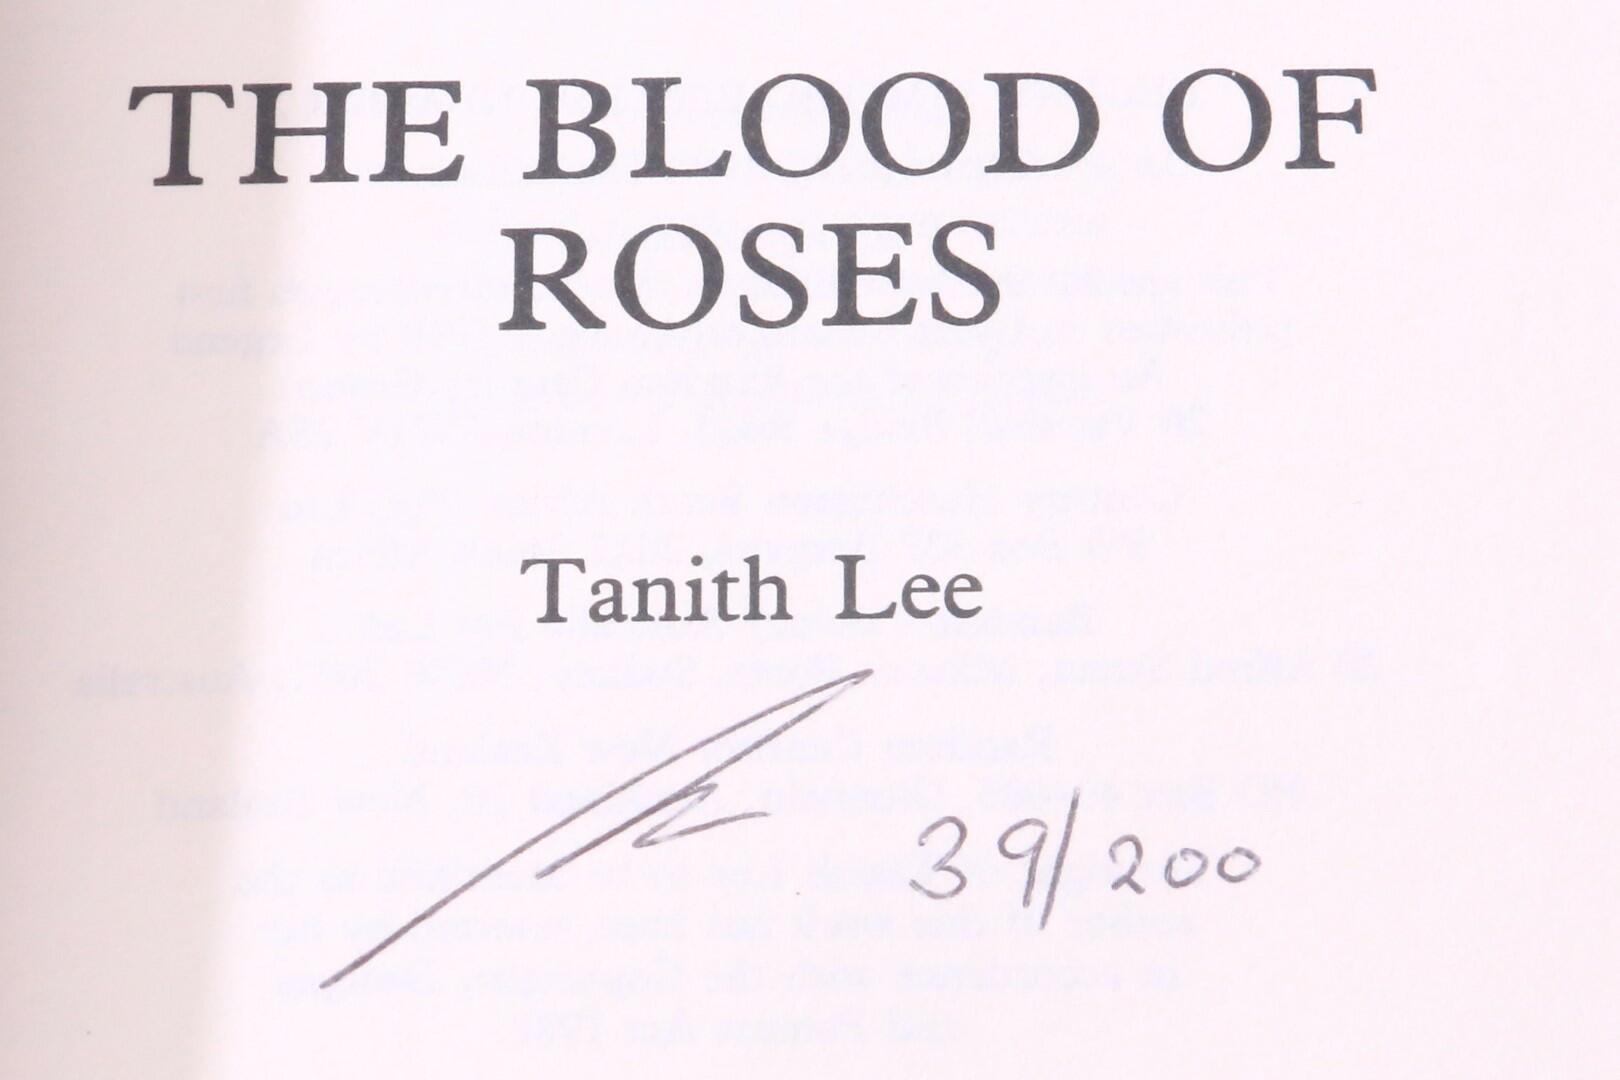 Tanith Lee - The Blood of Roses - Legend, 1990, Signed Limited Edition.